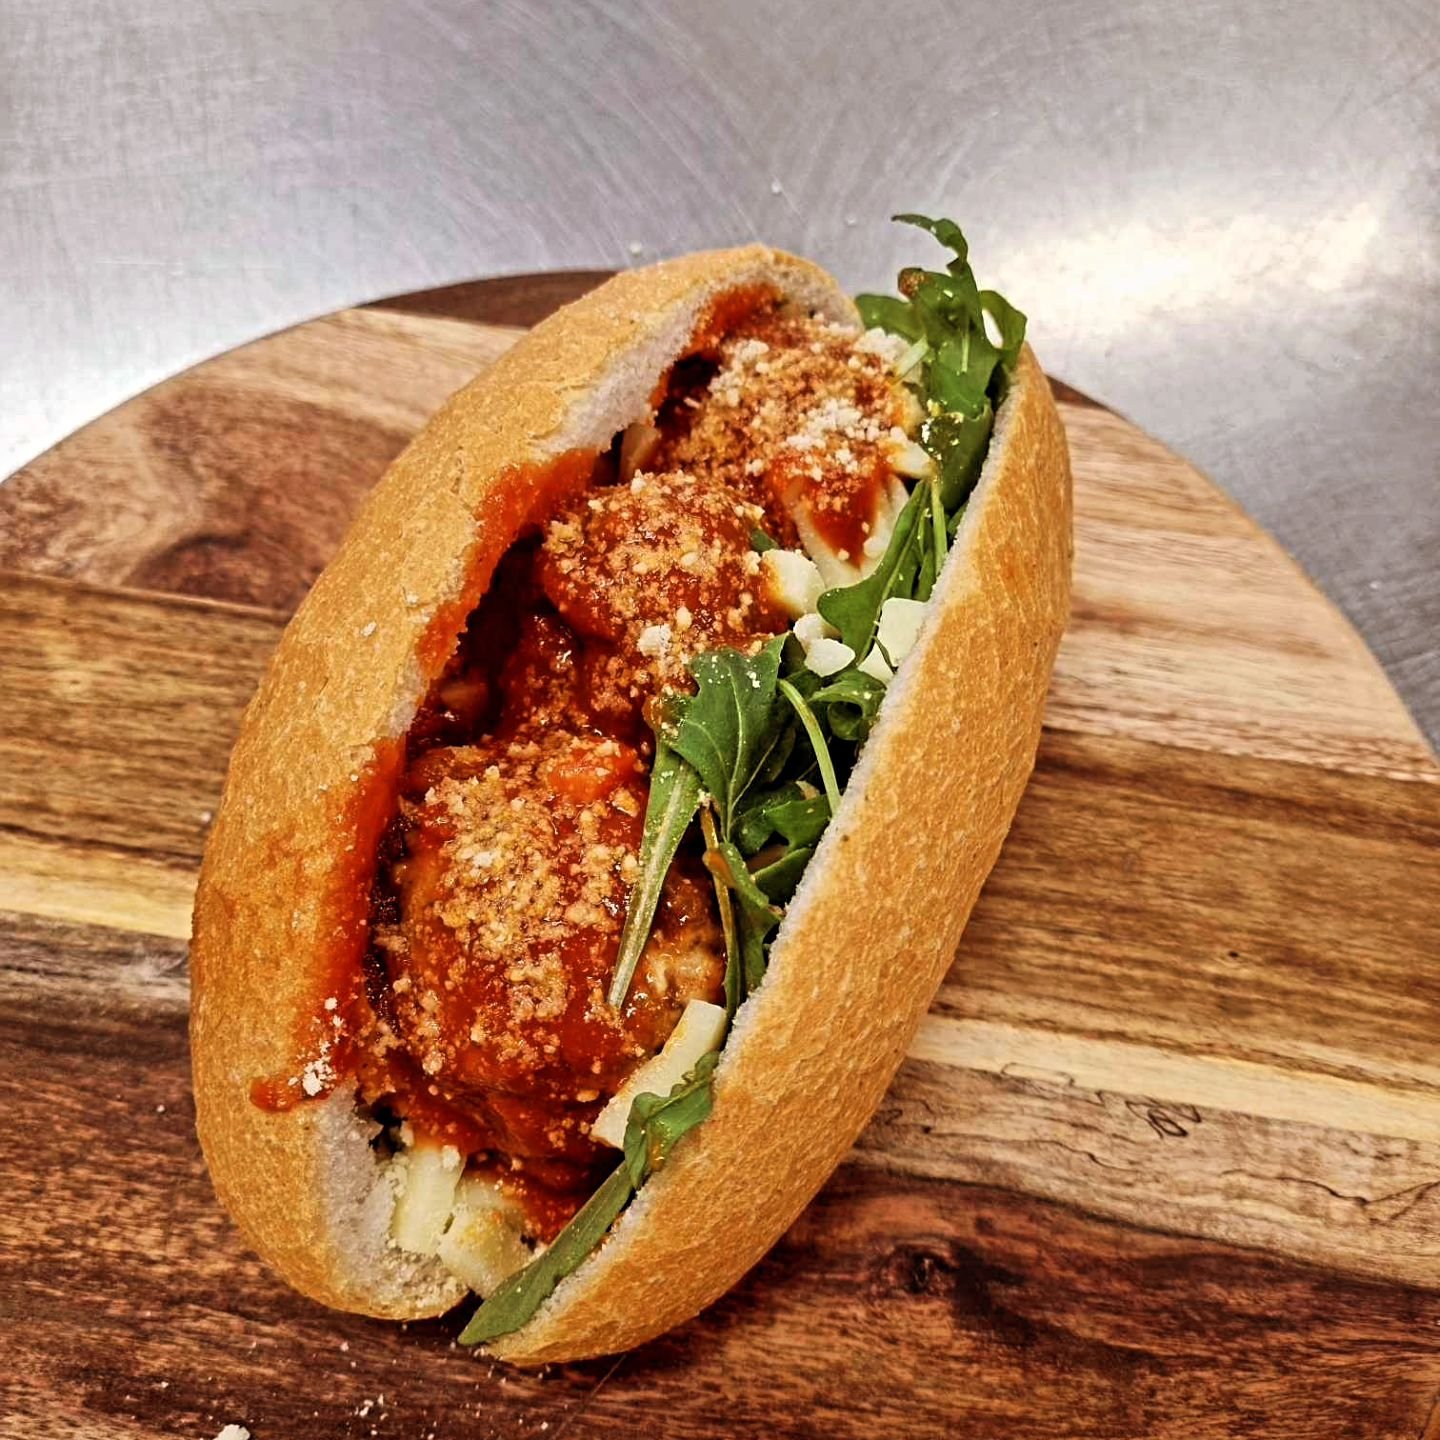 New item alert

For our hot food today we have made italian/american style meatball subs with cheesy mozarella, pesto and arugala dusted with some parmesan

Also mama jed has been busy making slices and made CARAMEL SLICE!! 
Get them quick before the